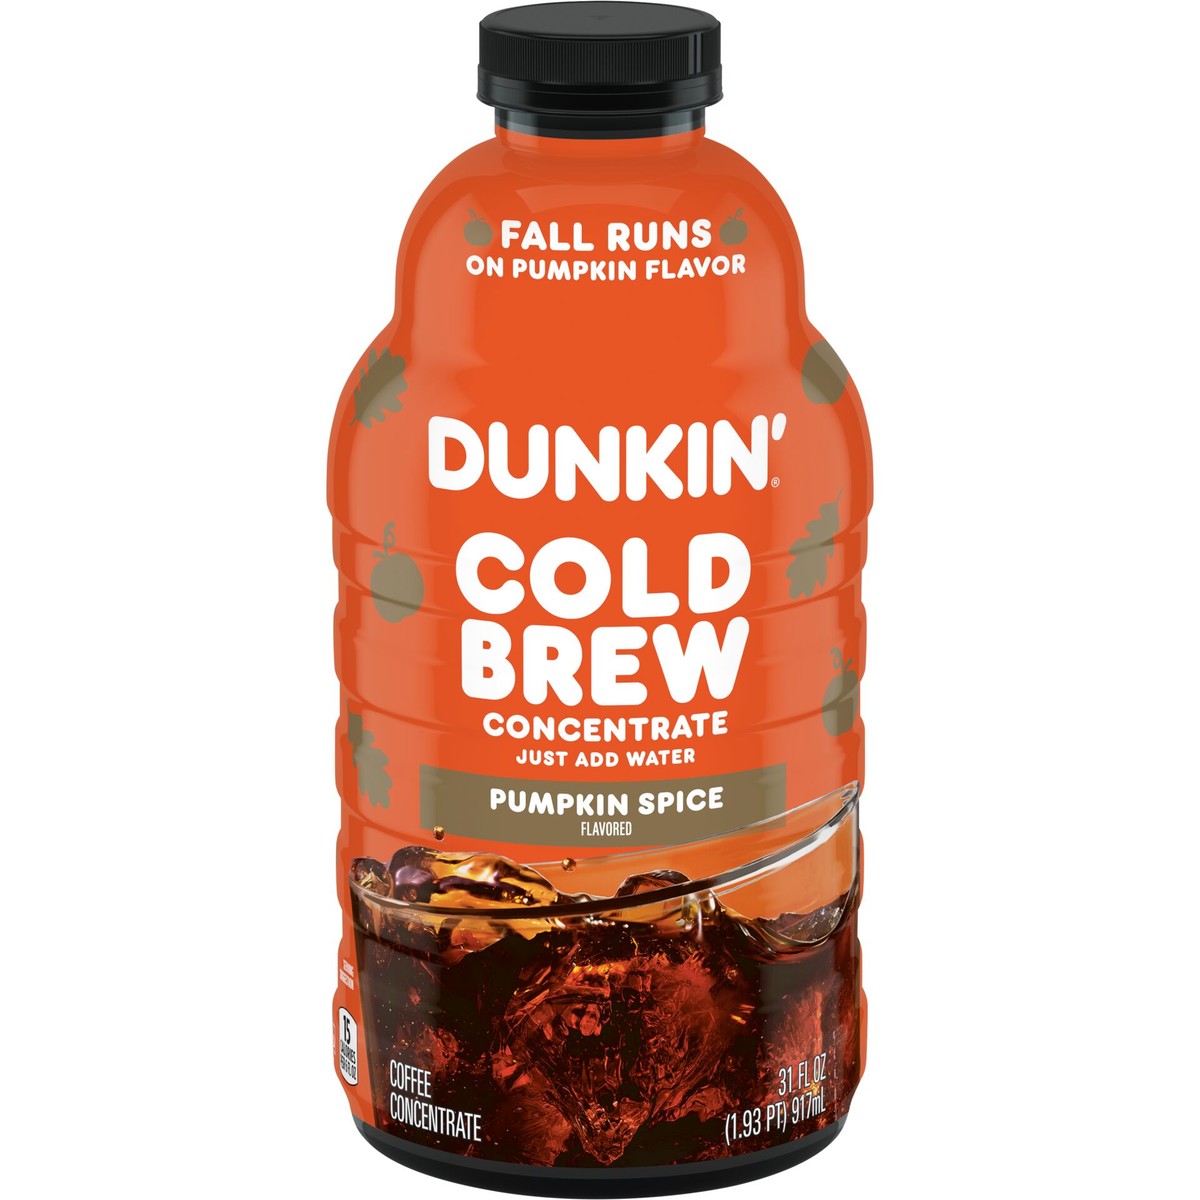 Dunkin’ Pumpkin Spice Flavored Cold Brew Concentrate